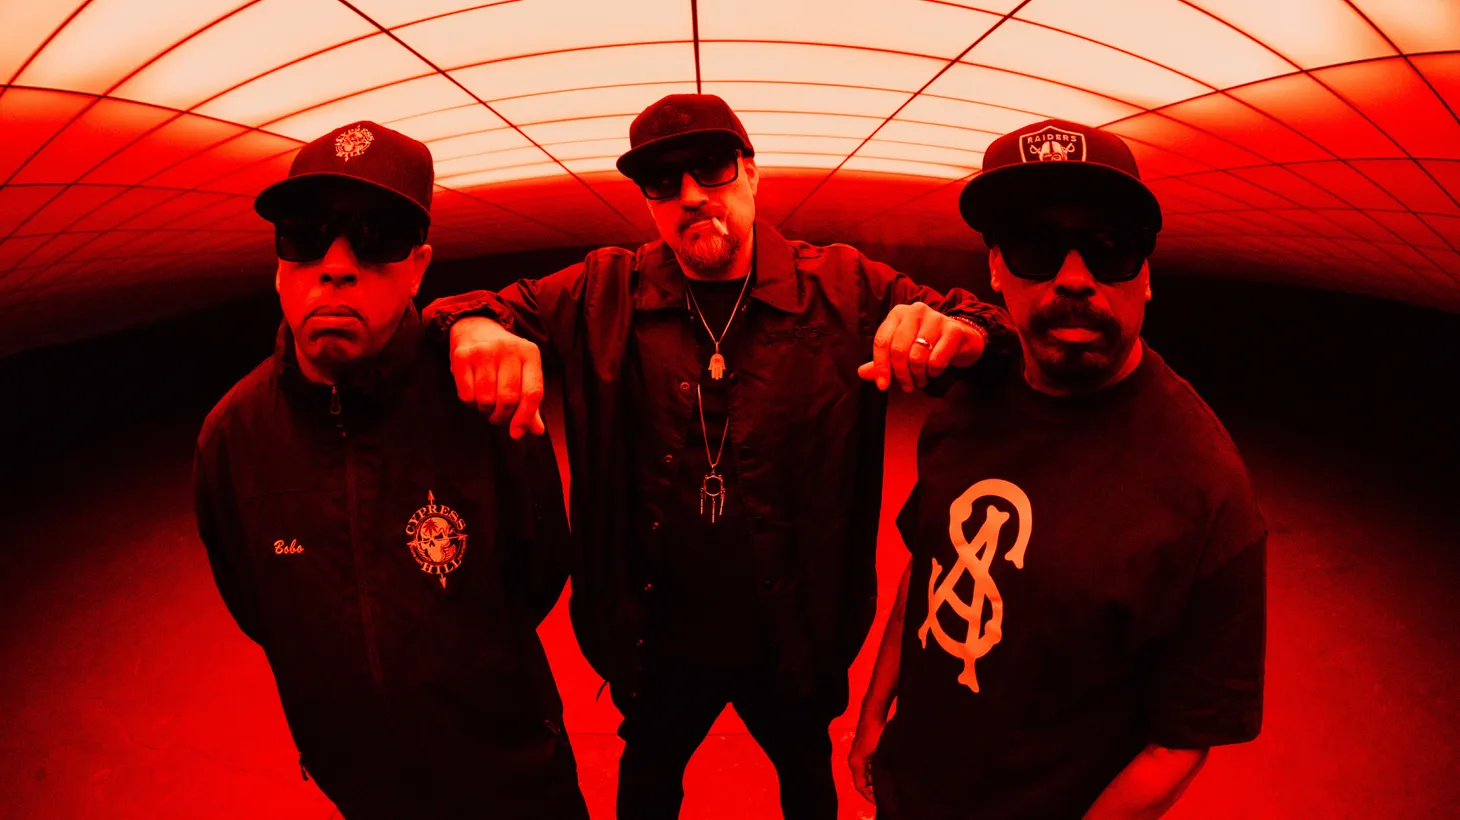 Hip-hop hometown pioneers Cypress Hill deliver a new surprise single after a year’s worth of major releases and a new documentary, “Cypress Hill: Insane In The Brain.”